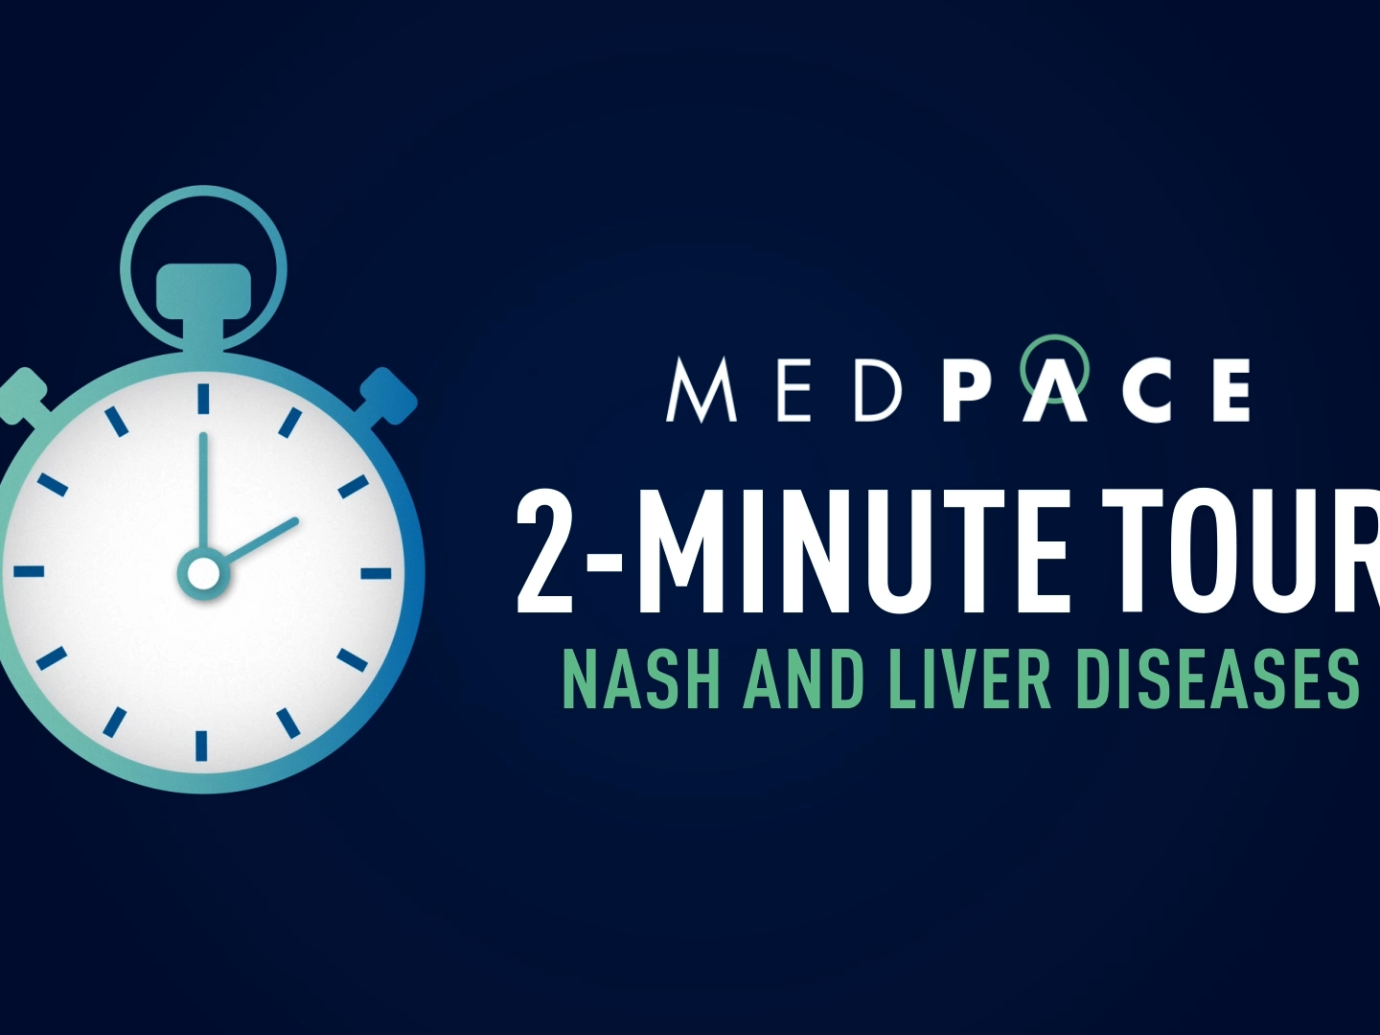 Two Minute Tour NASH & Liver Diseases